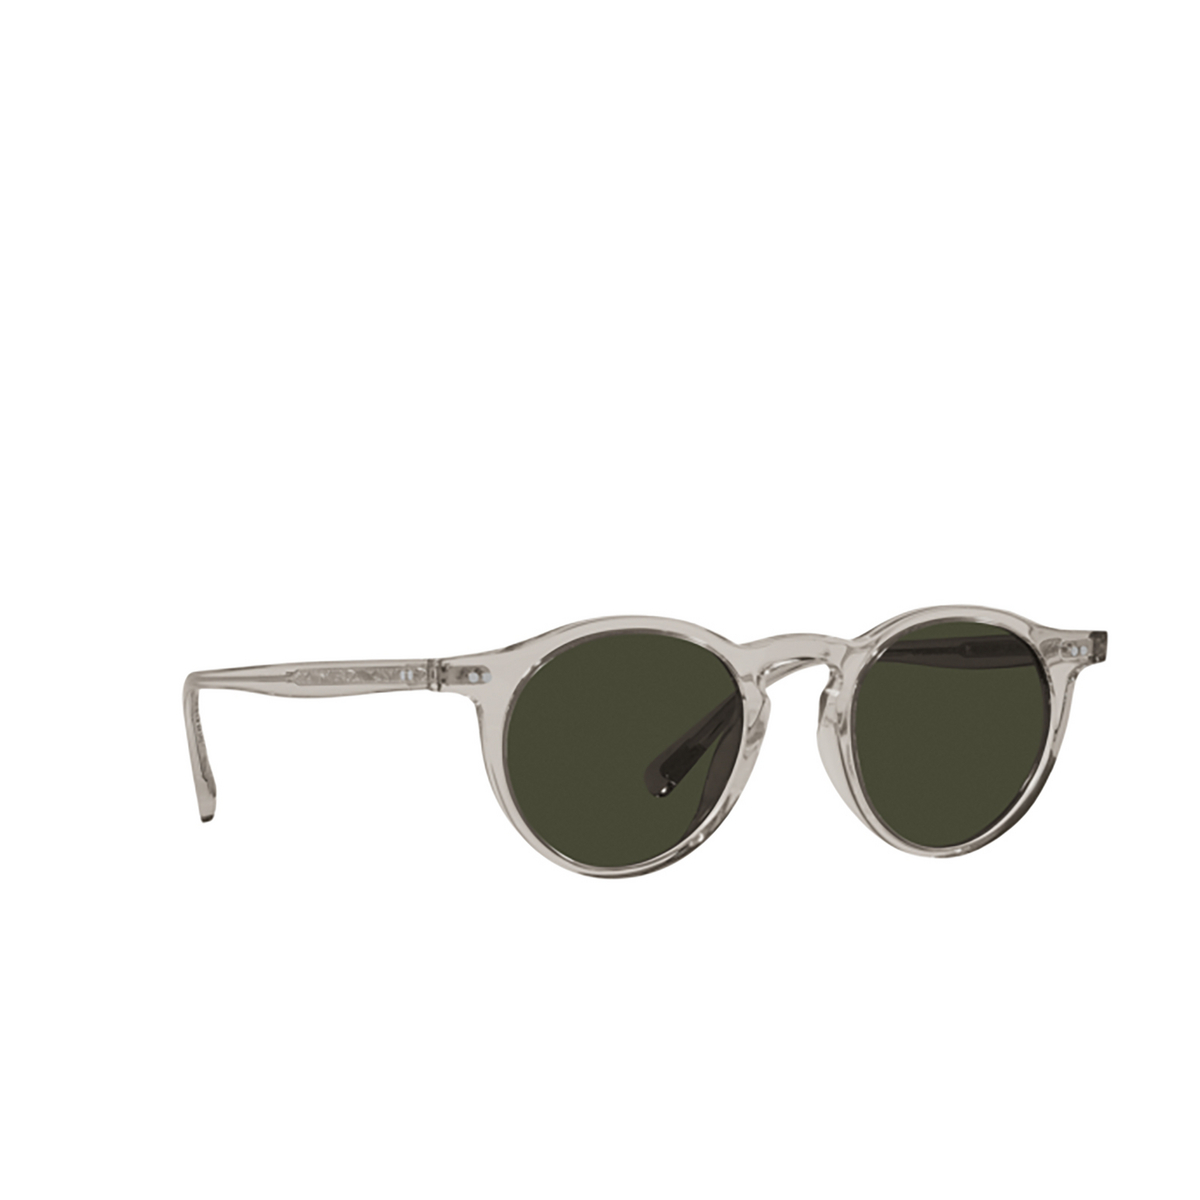 Oliver Peoples OP-13 Sunglasses 1757P1 Gravel - three-quarters view